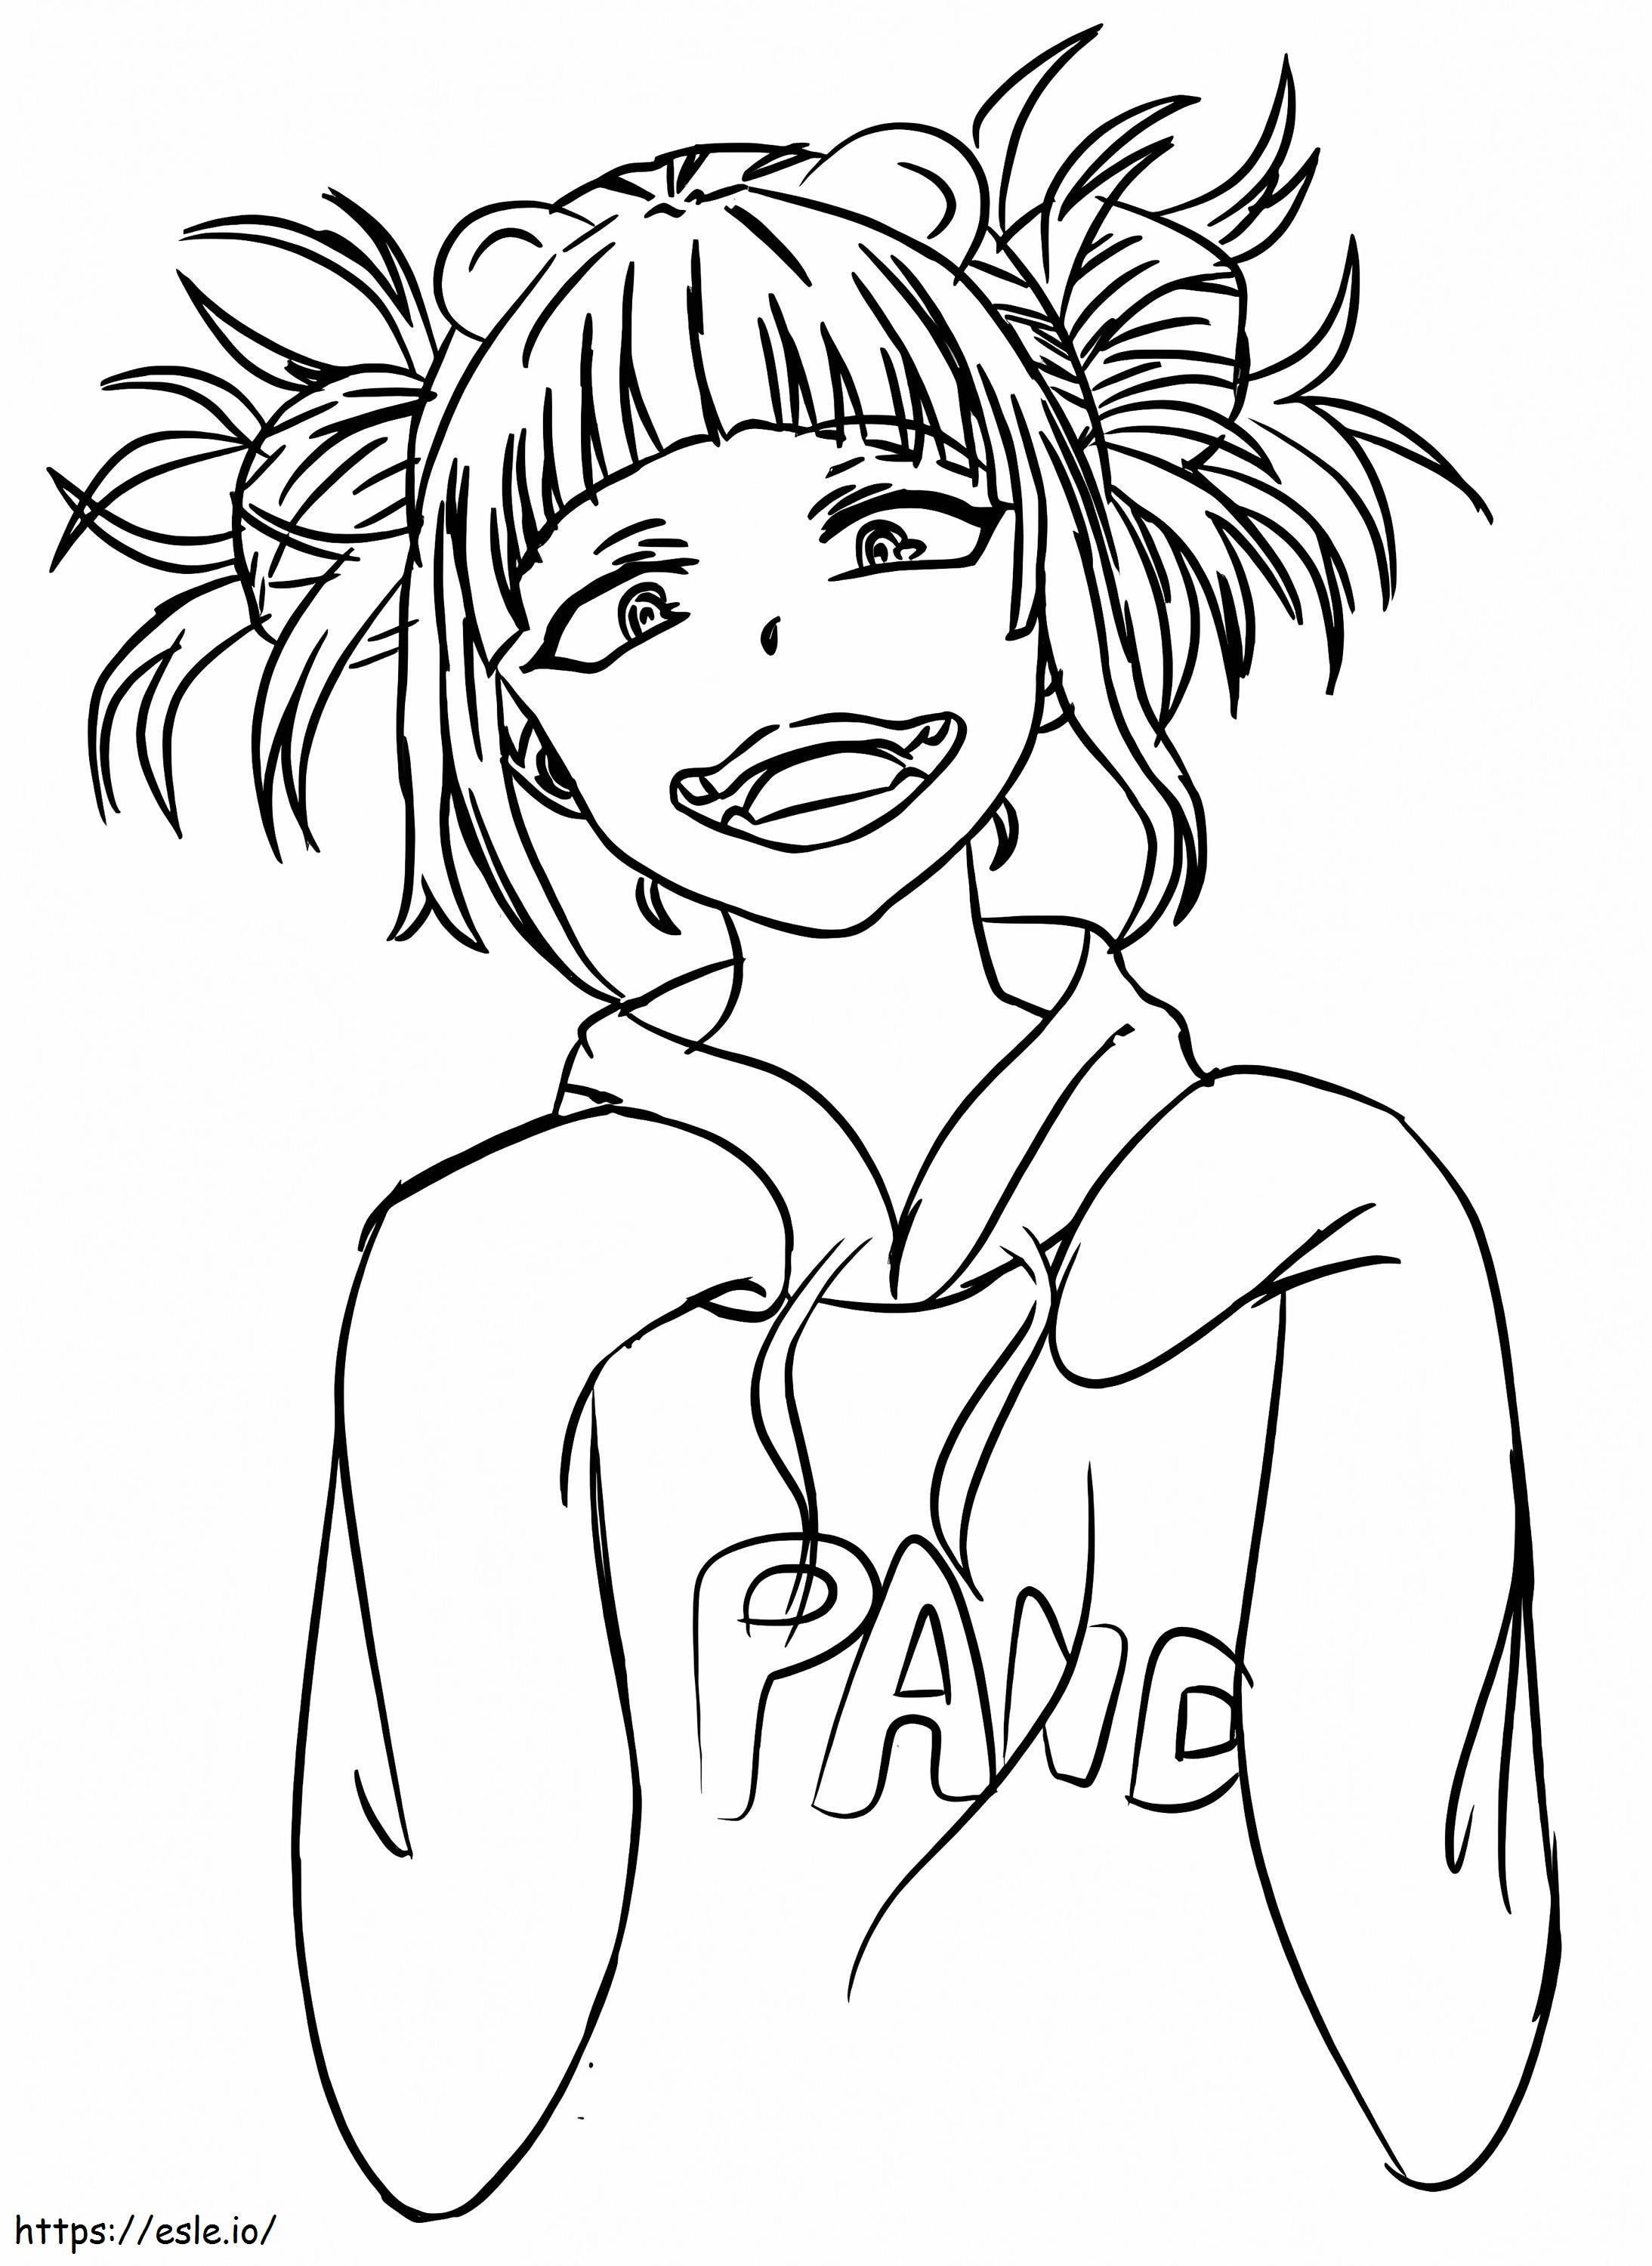 Printable Himiko Toga coloring page